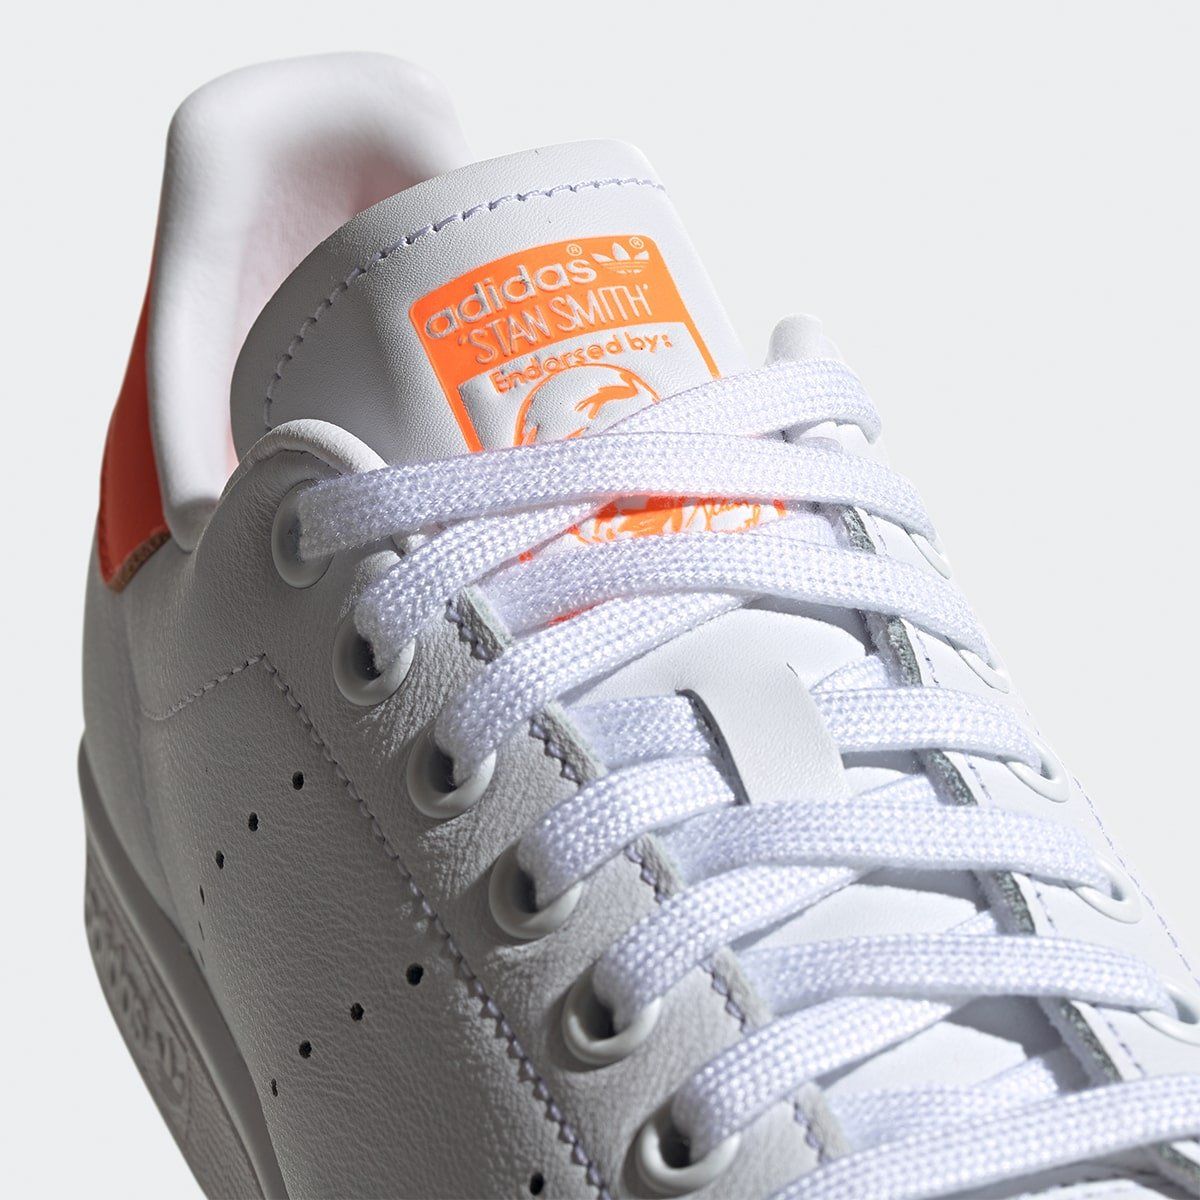 adidas stan smith endorsed by